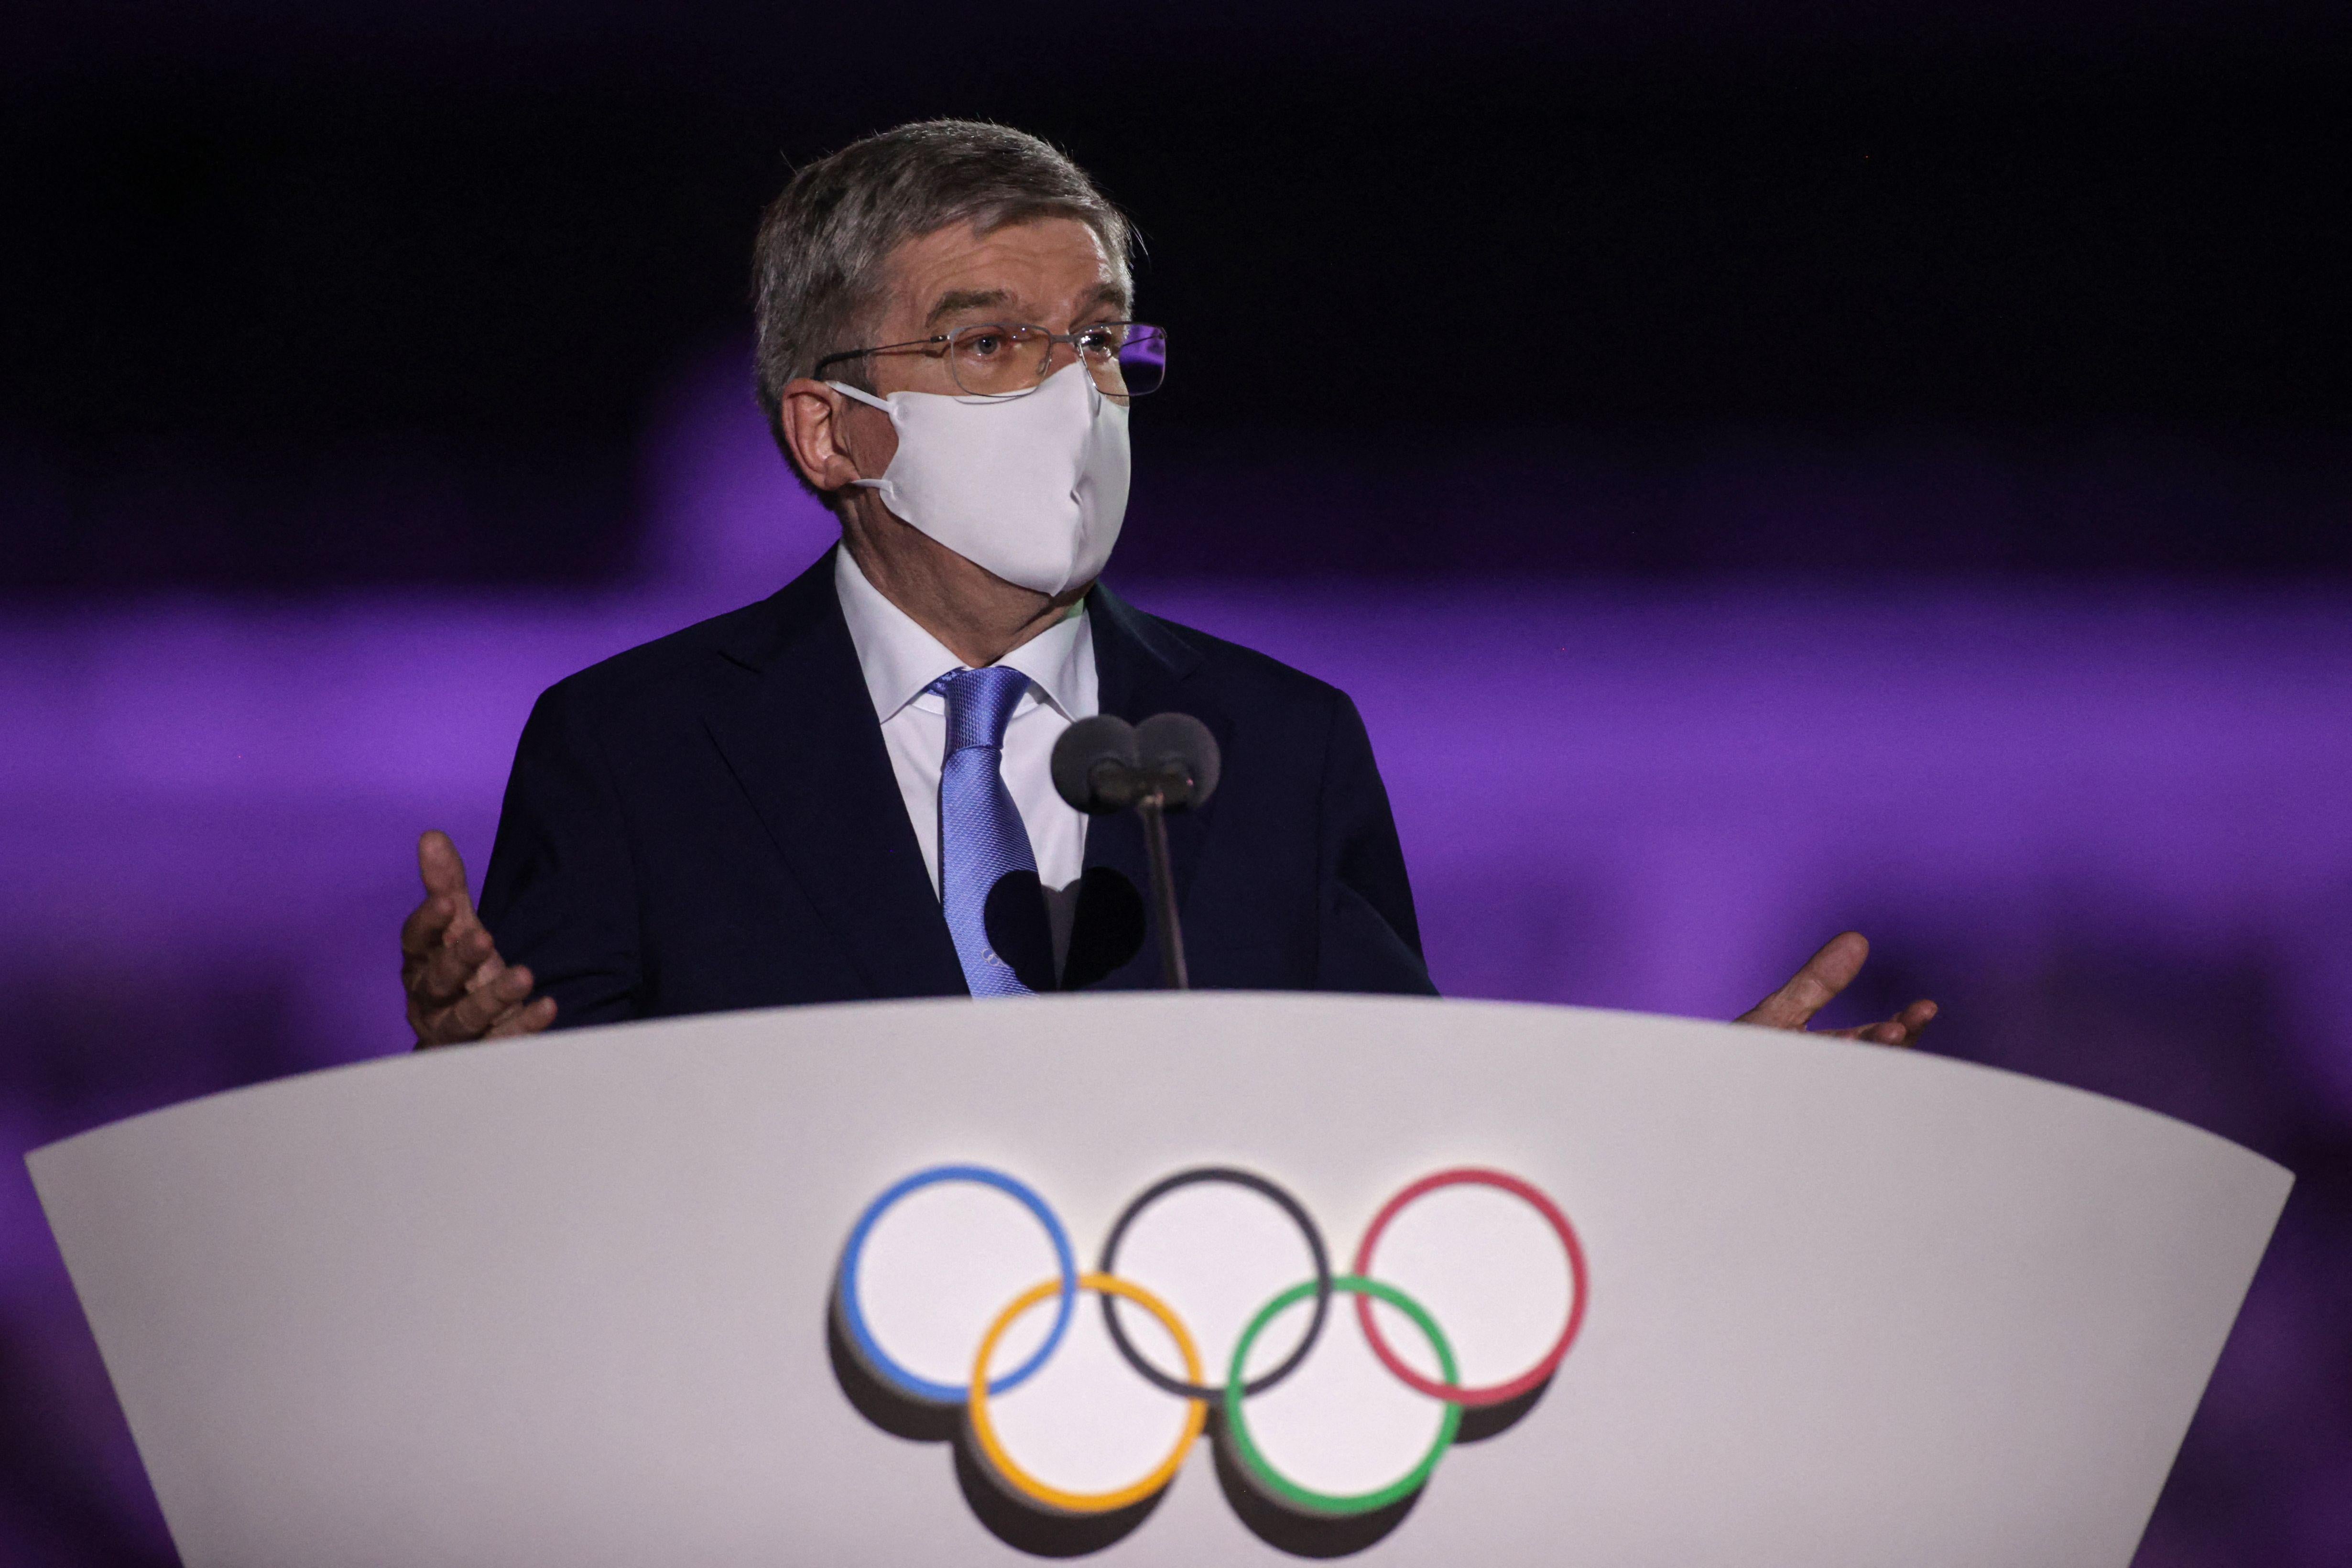 A masked older man in a suit and a mask speaks at a podium with the Olympic rings on it, gesturing with both hands